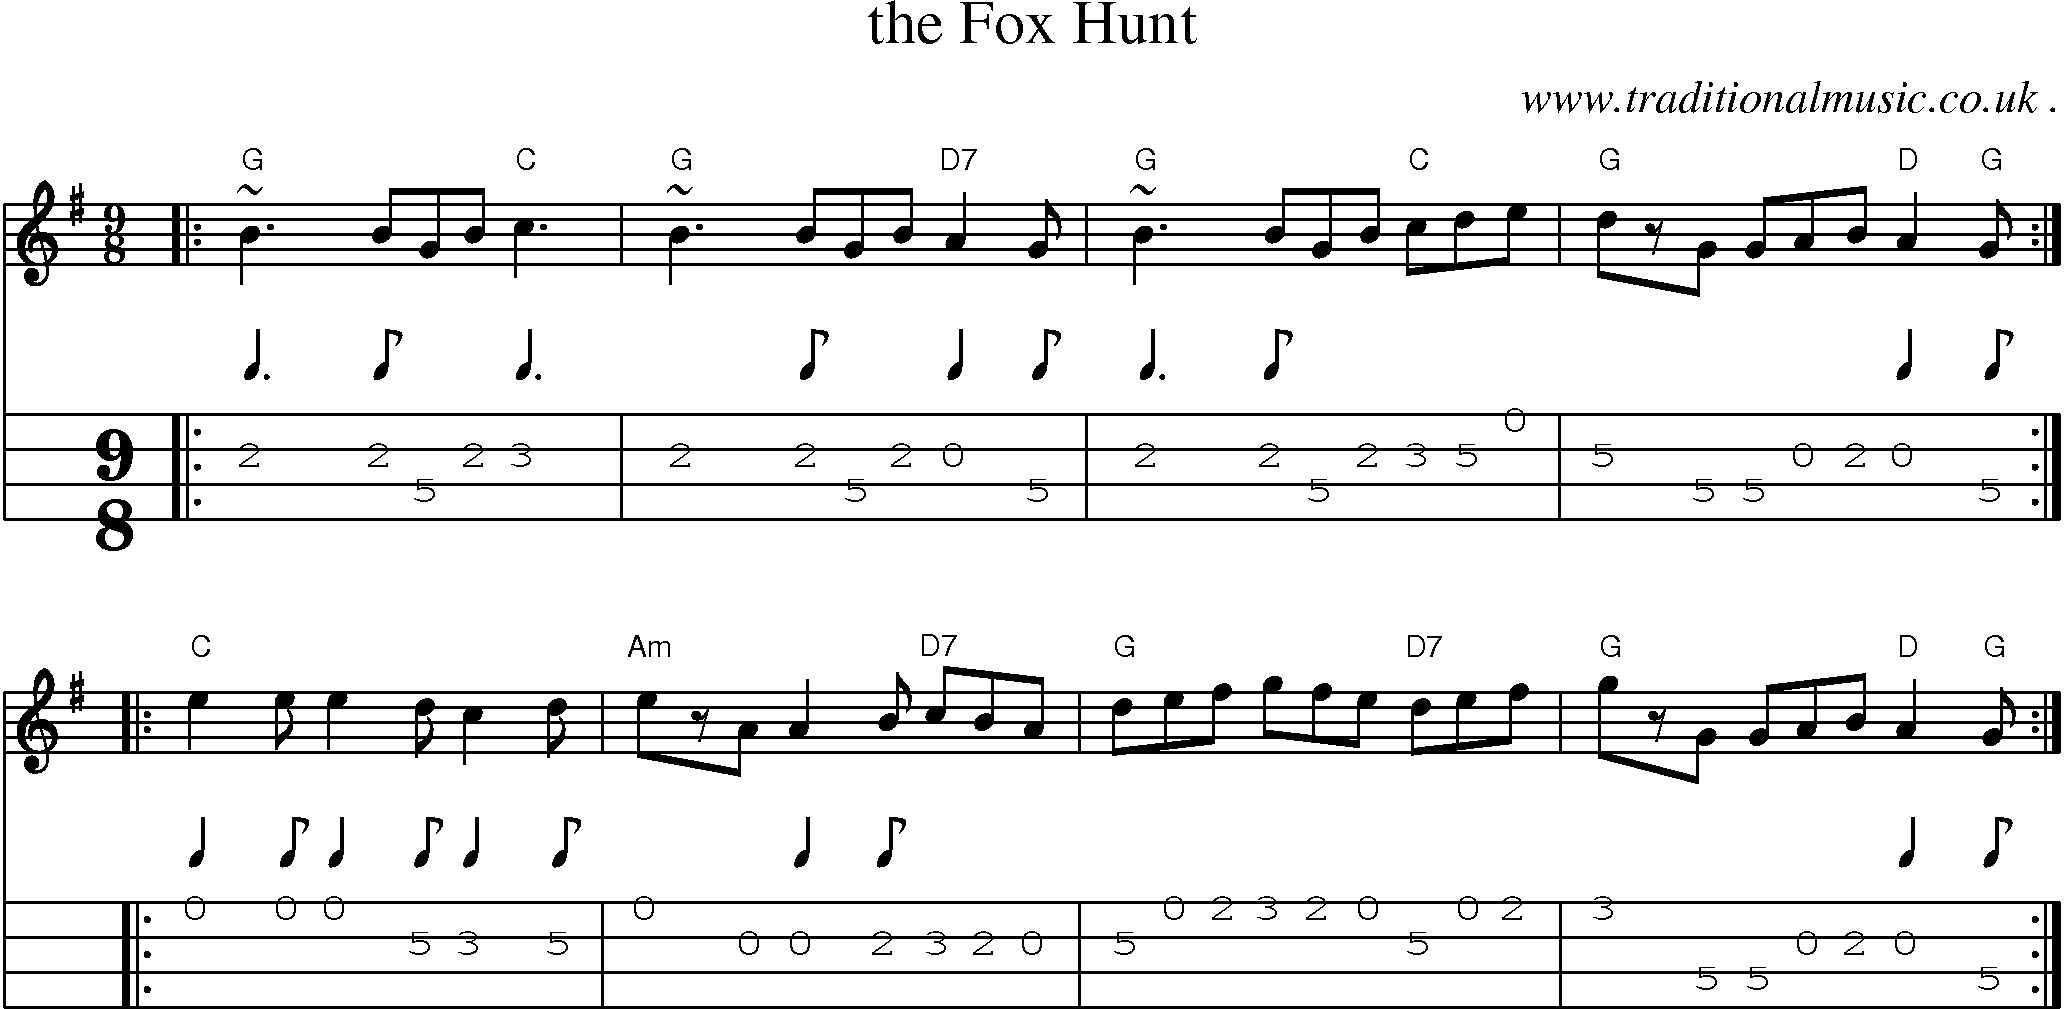 Sheet-music  score, Chords and Mandolin Tabs for The Fox Hunt